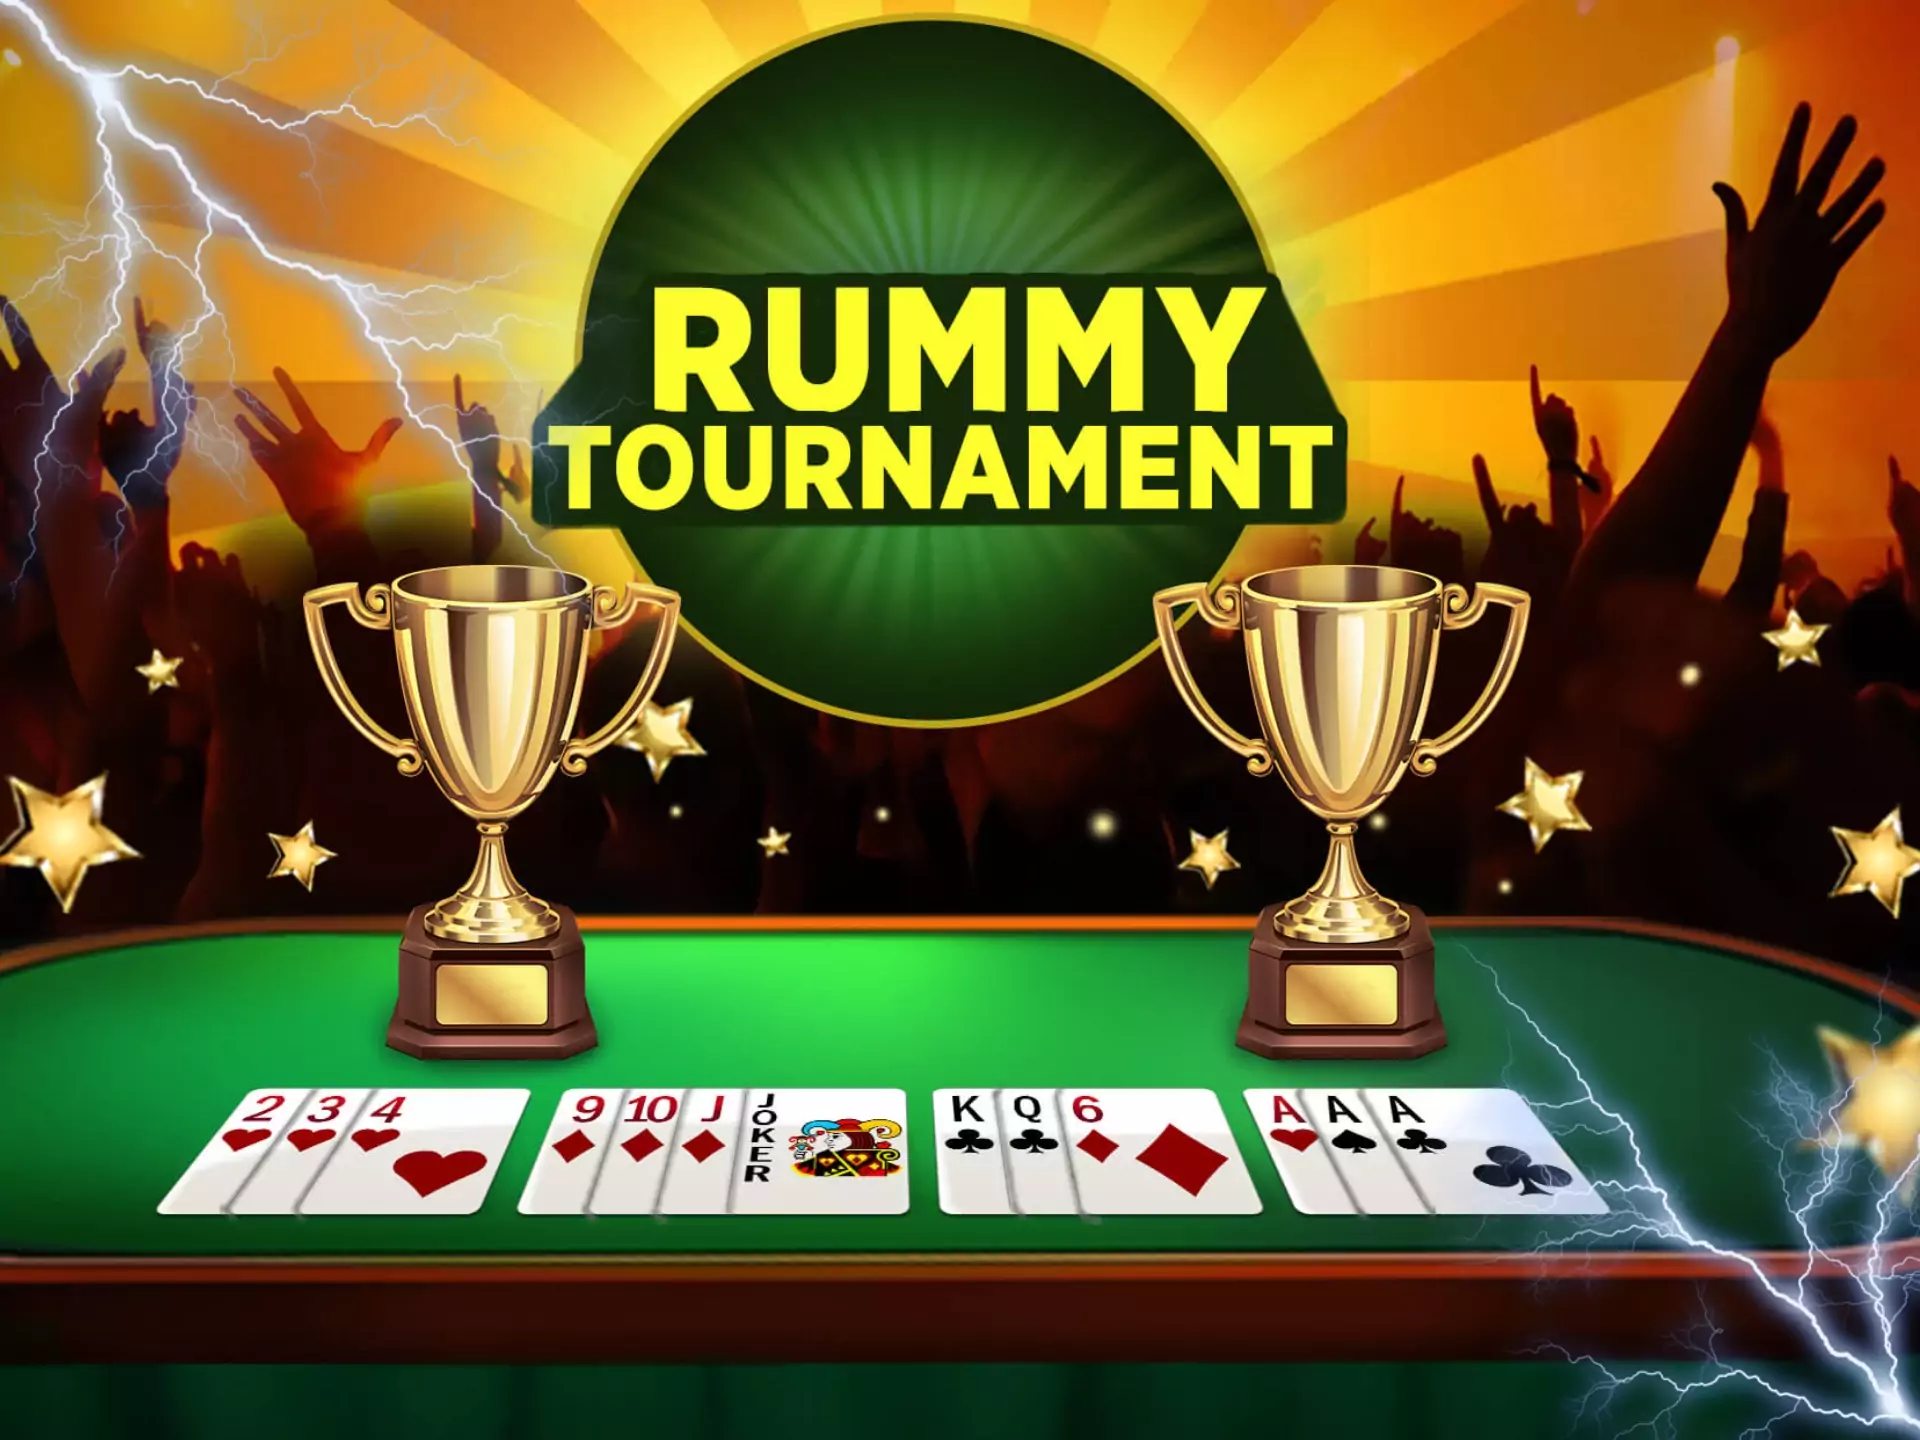 Participate in Rummy tournaments and get big prizes.